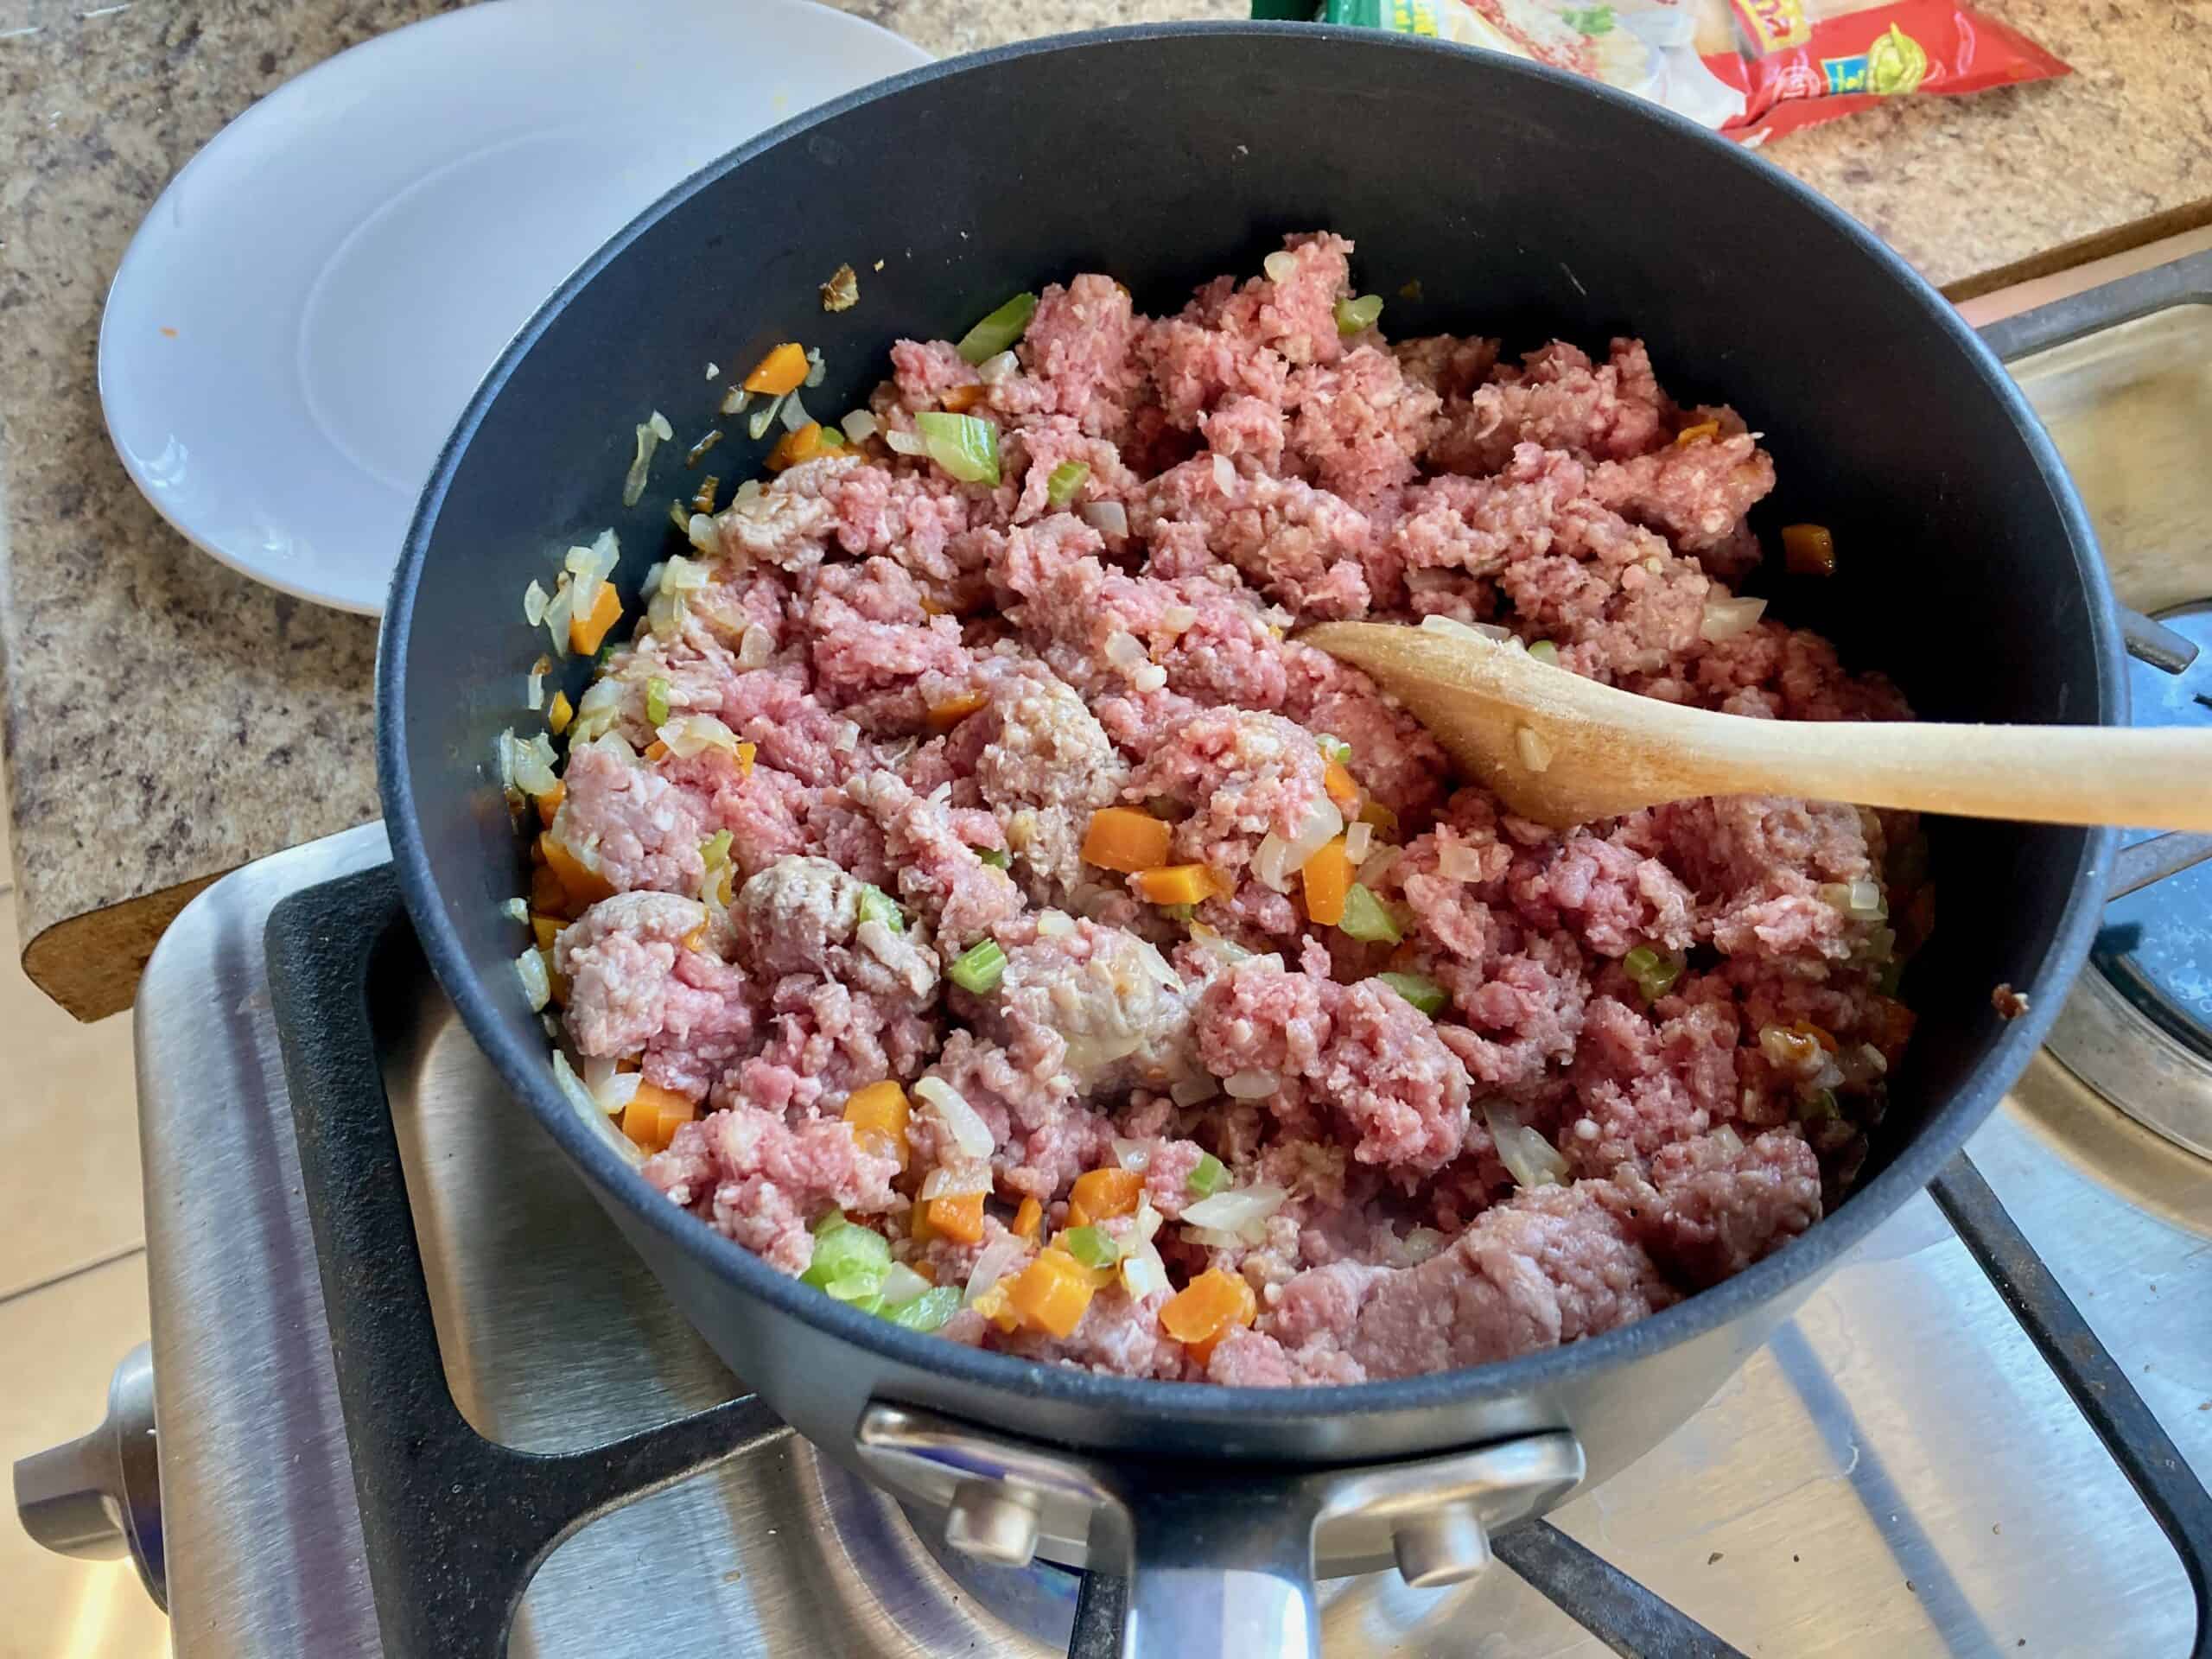 Ground turkey and vegetables in a pot with a wooden spoon on the stove.